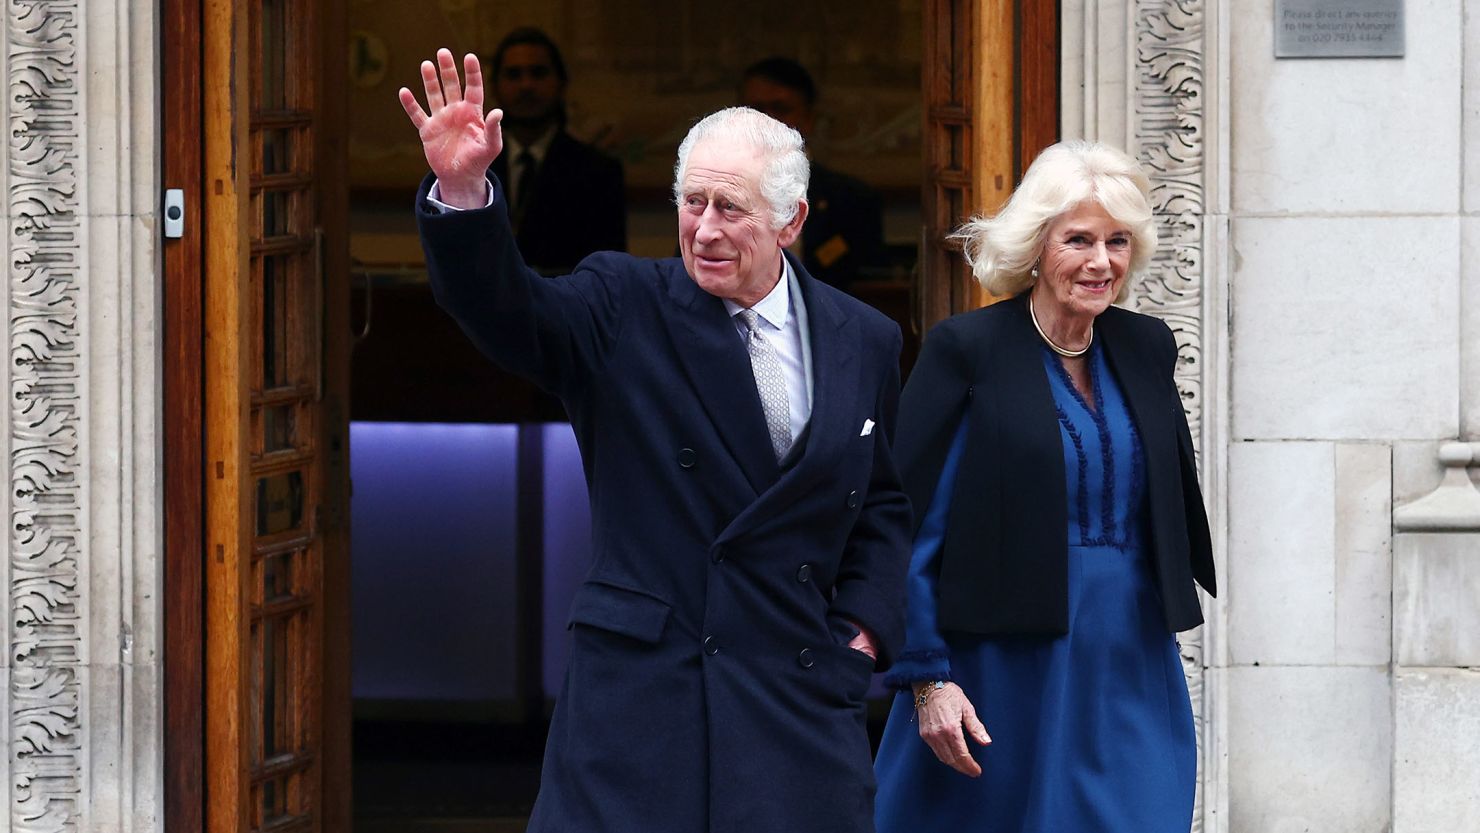 LONDON, ENGLAND - JANUARY 29: Britain's King Charles III and Queen Camilla are seen leaving The London Clinic on January 29, 2024 in London, England. The King has been receiving treatment for an enlarged prostate, spending three nights at the London Clinic and visited daily by his wife Queen Camilla. (Photo by Peter Nicholls/Getty Images)